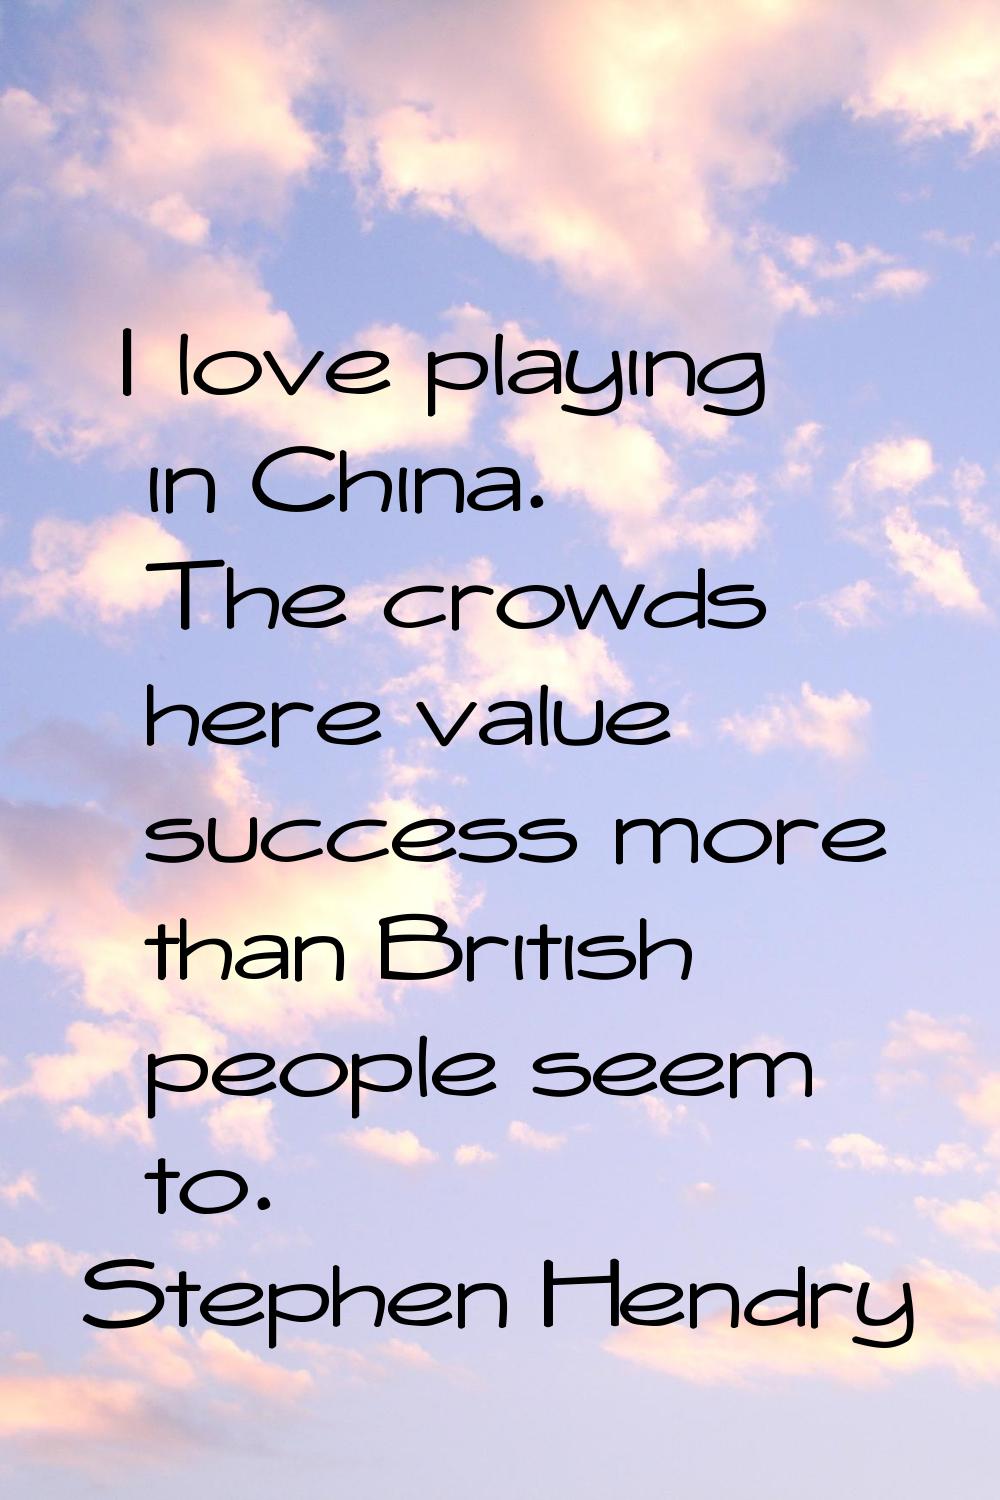 I love playing in China. The crowds here value success more than British people seem to.